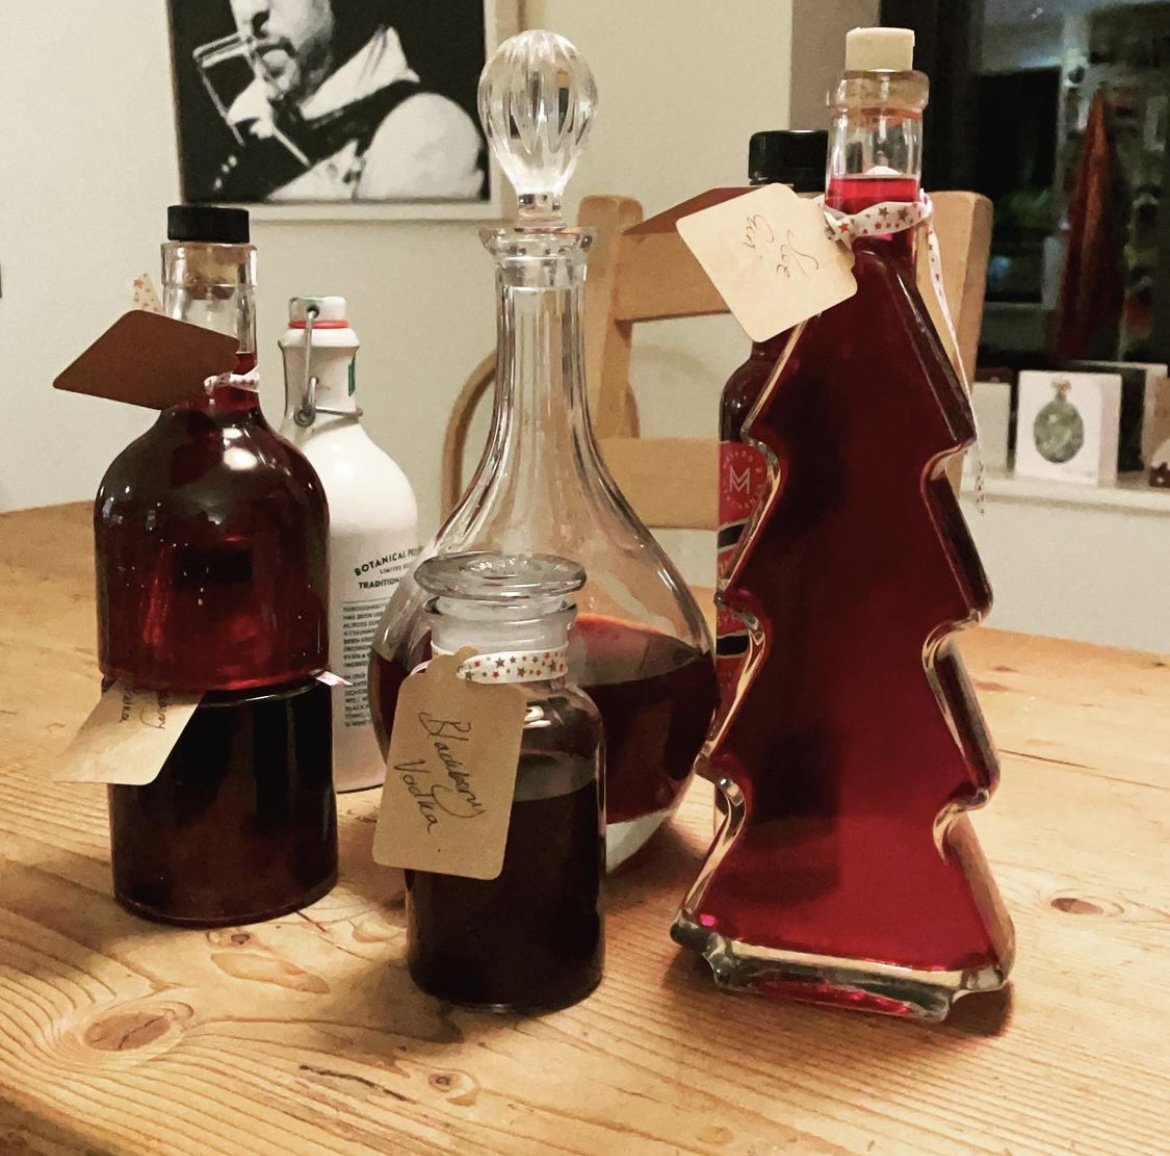 Bobby prepares batches of Sloe gin in bottles saved up over the year. Photo: Roberta Twidale